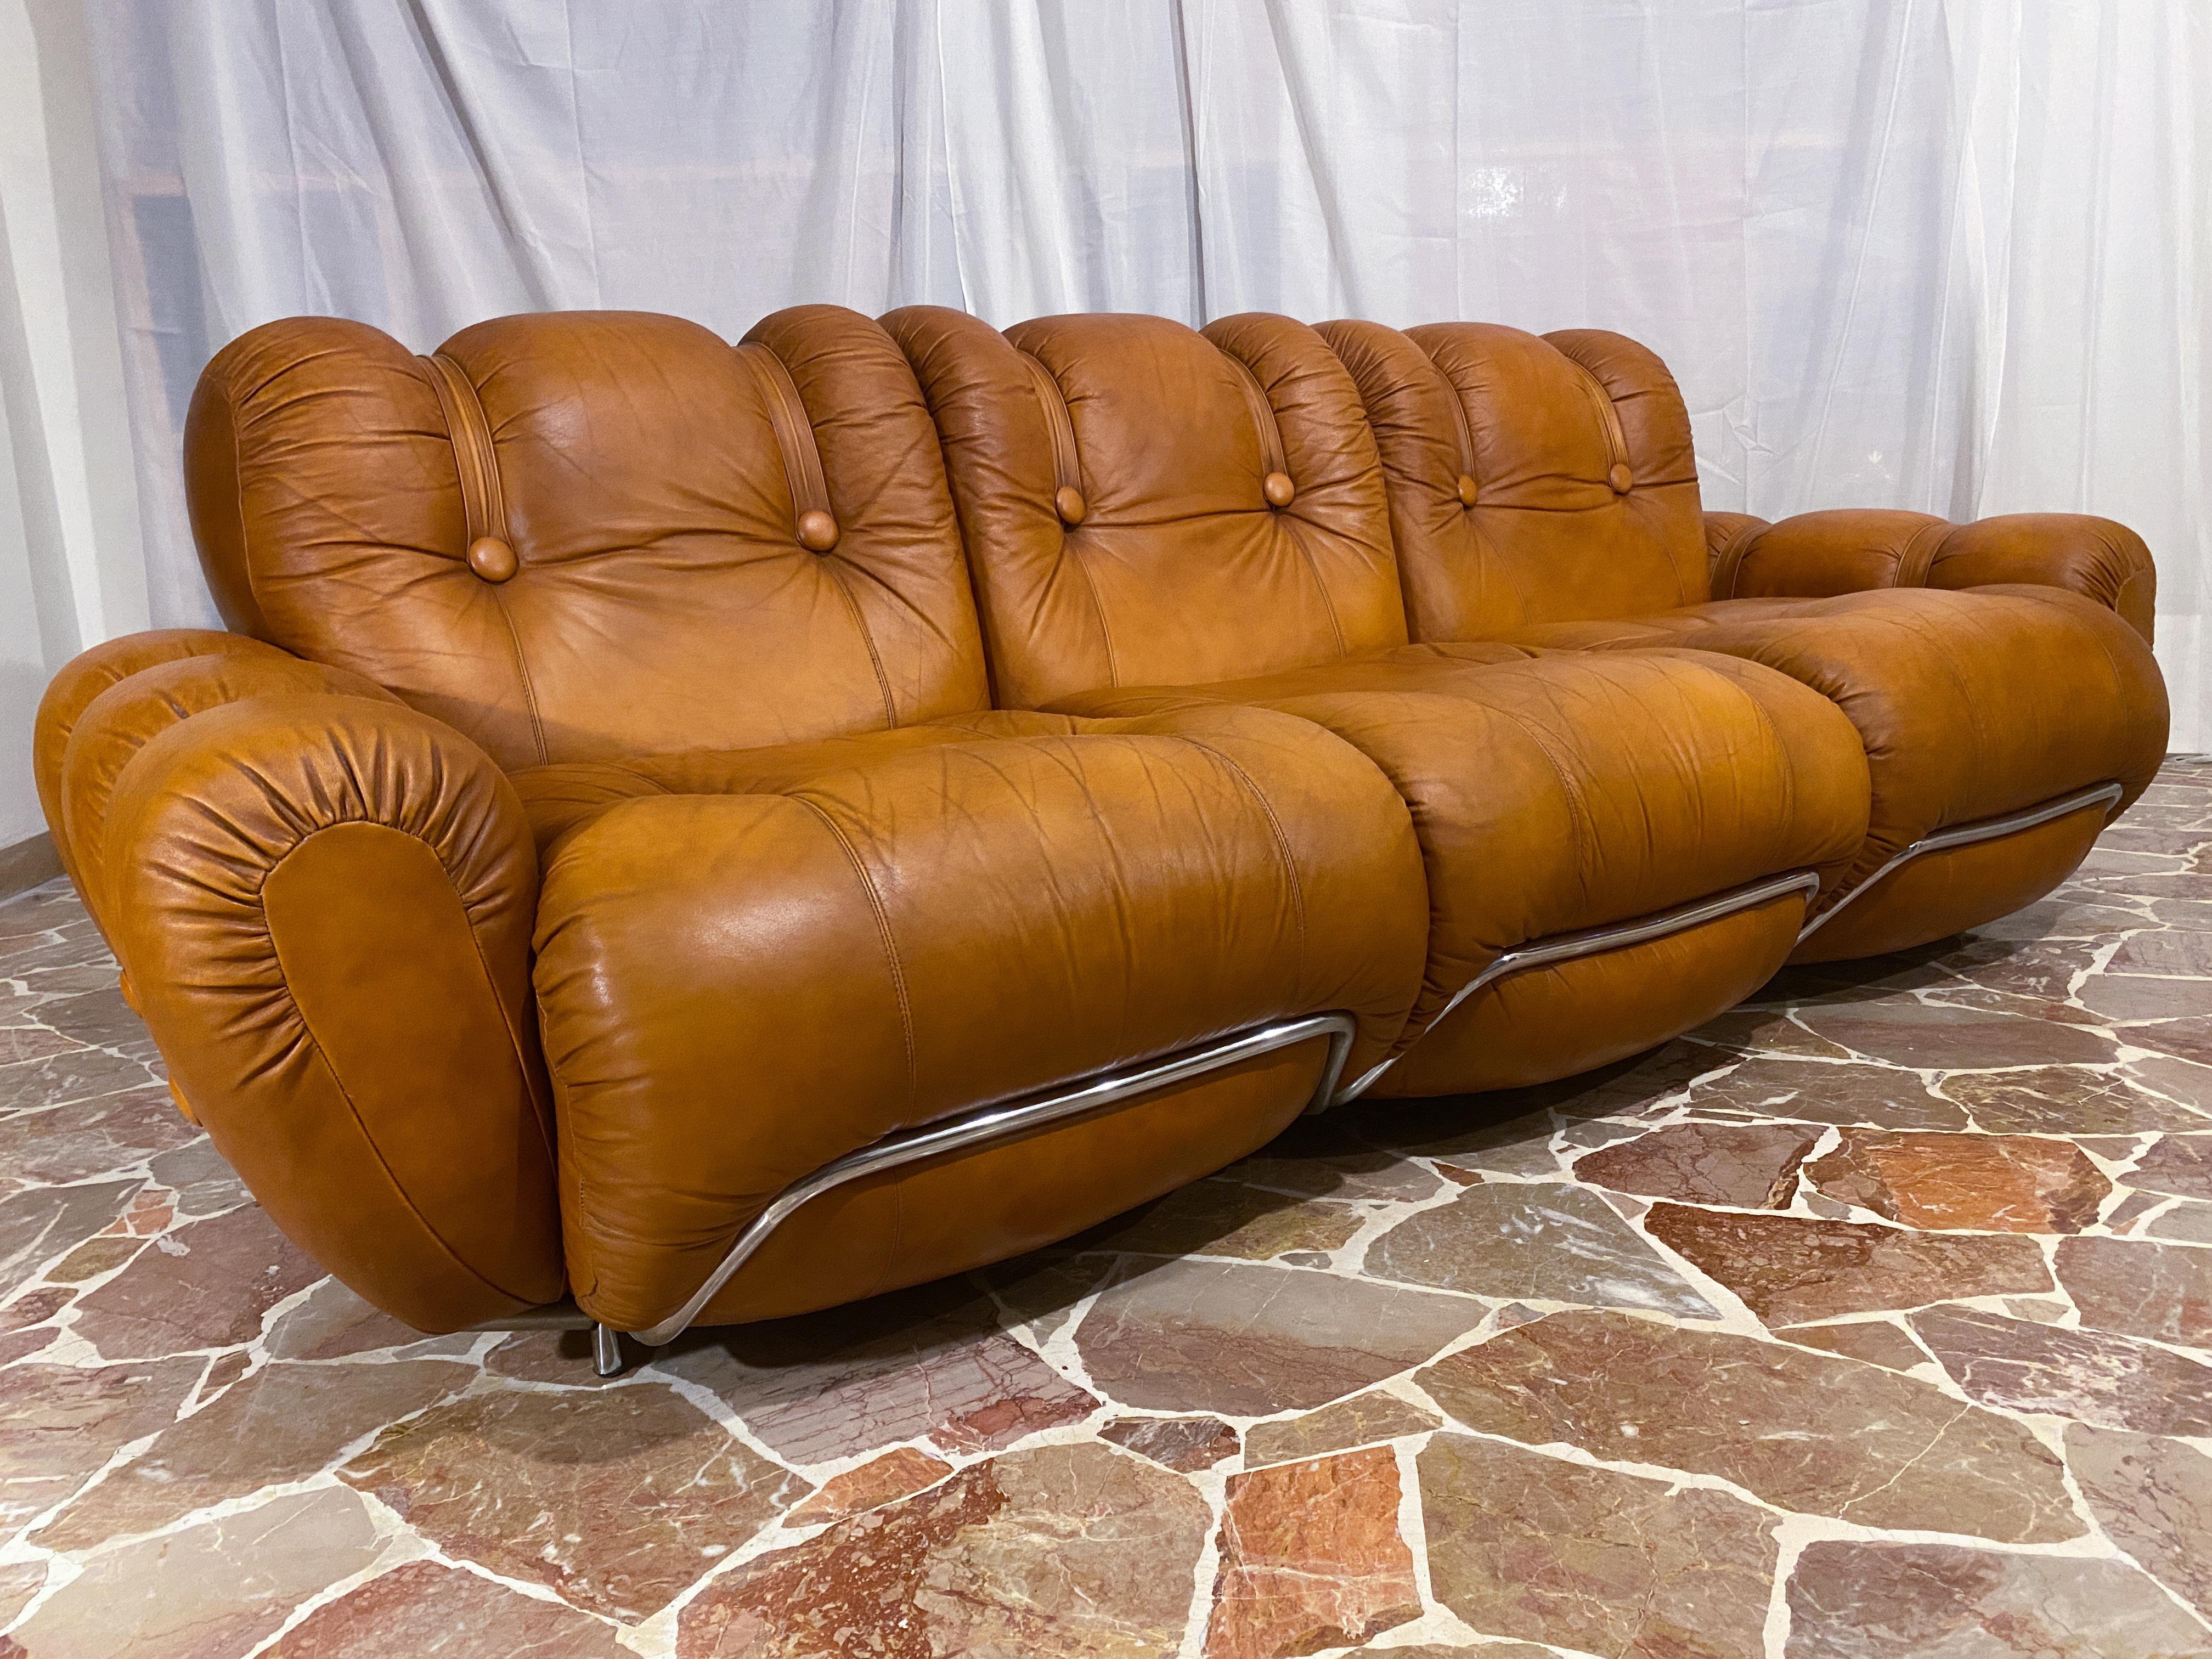 Italian Midcentury Three-Seater Natural Leather Space Age Sofa, 1970s For Sale 4